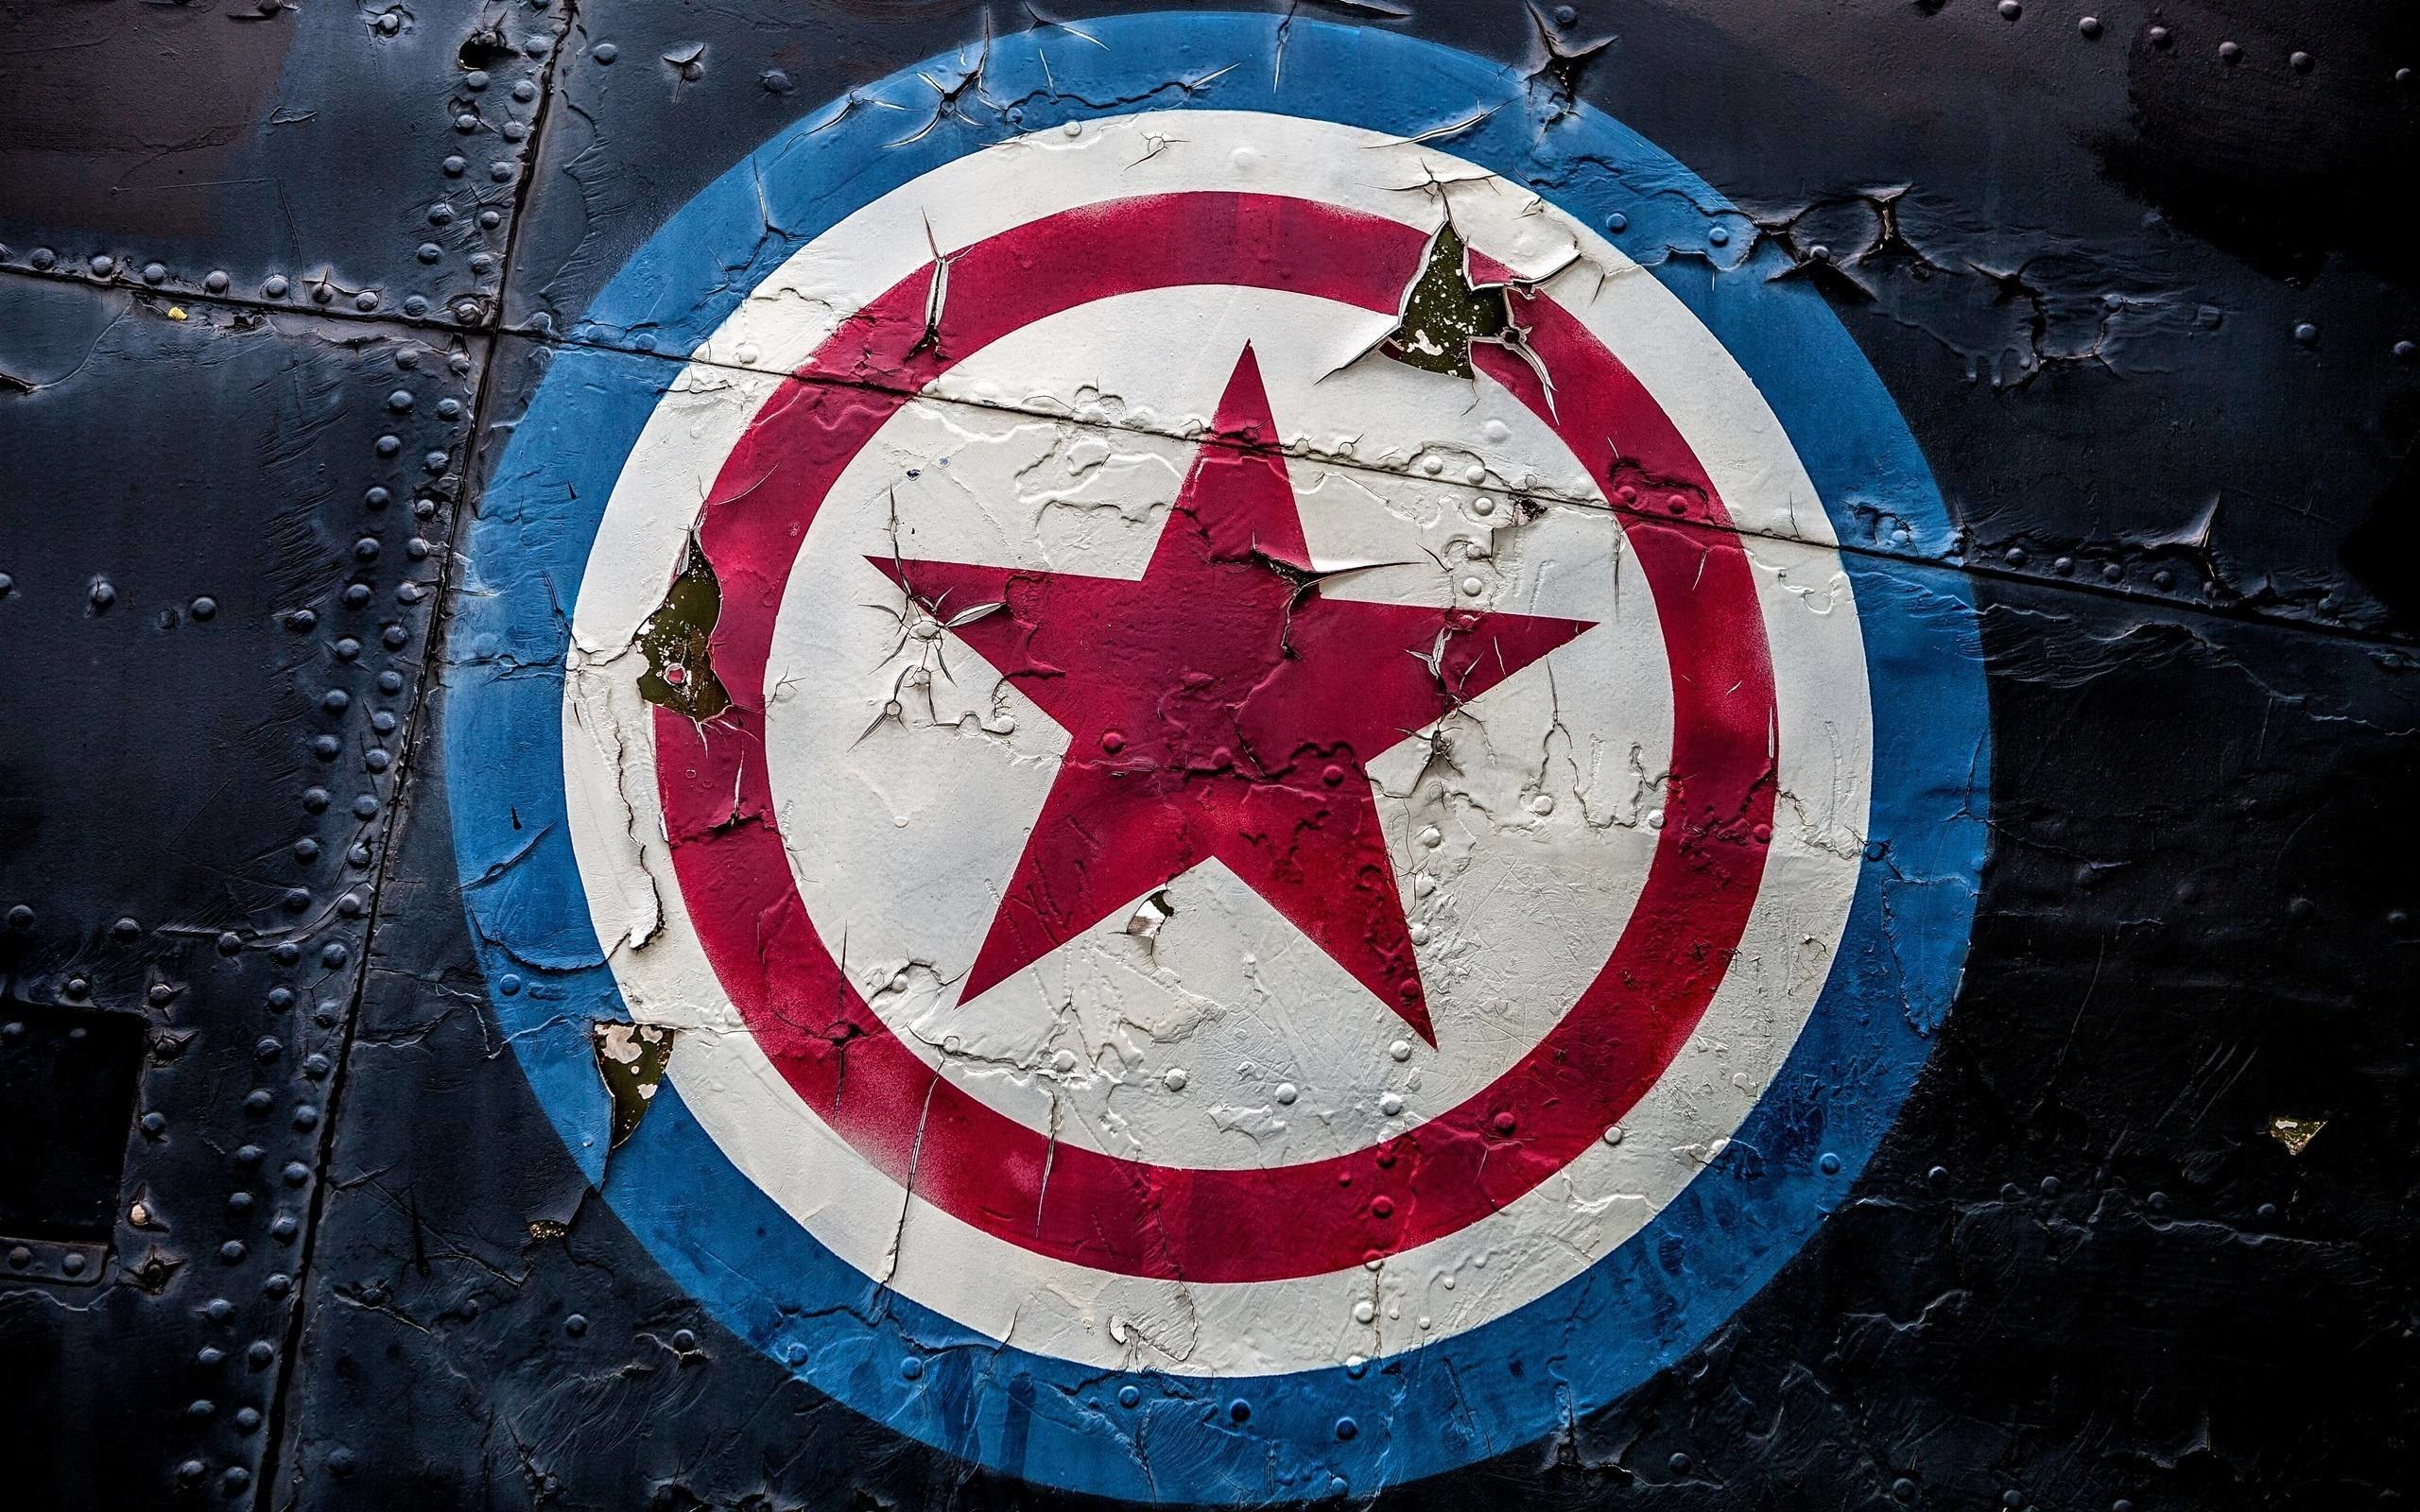 2560x1600 655 Captain America HD Wallpapers | Backgrounds - Wallpaper Abyss .